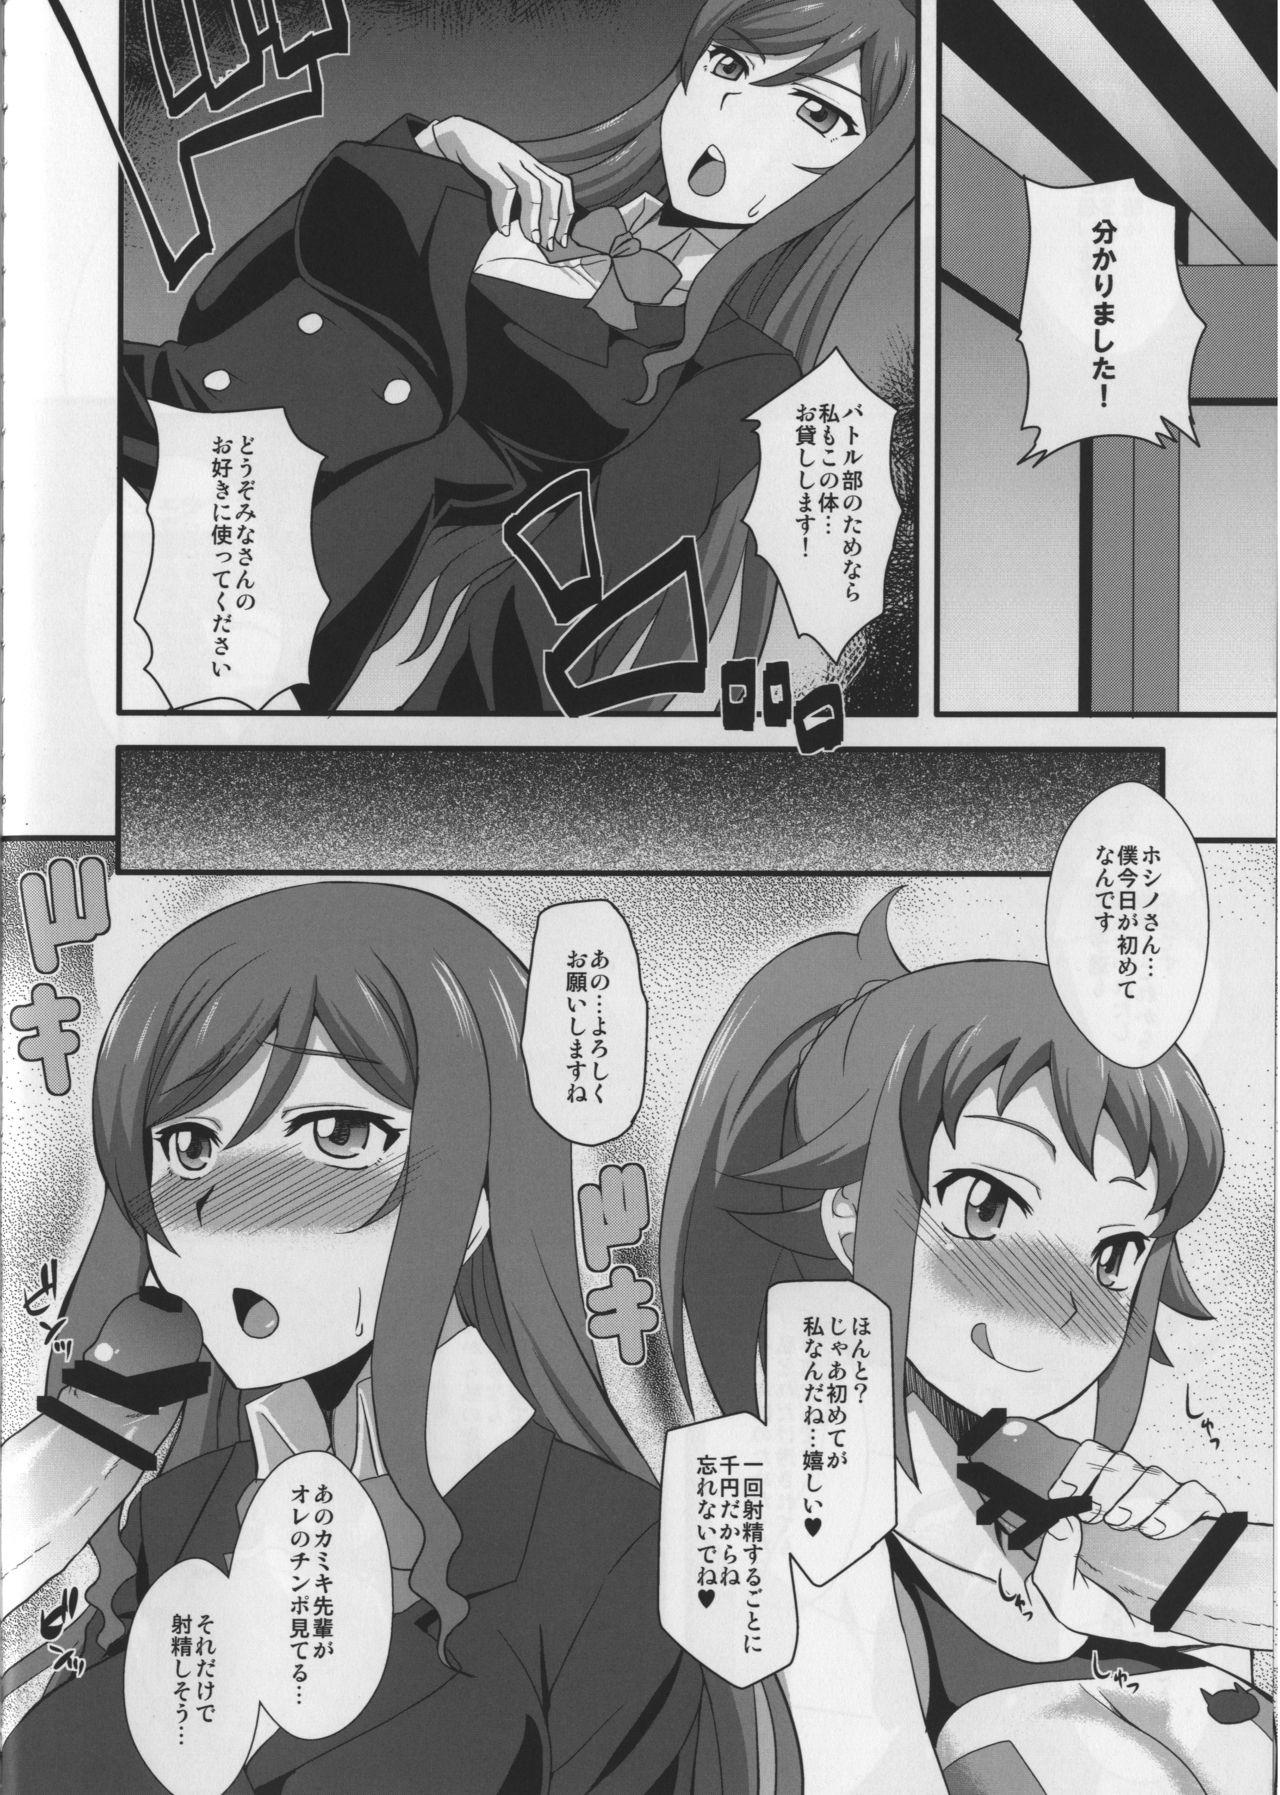 Jav Sex Fighters TRY - Gundam build fighters try Pervert - Page 6